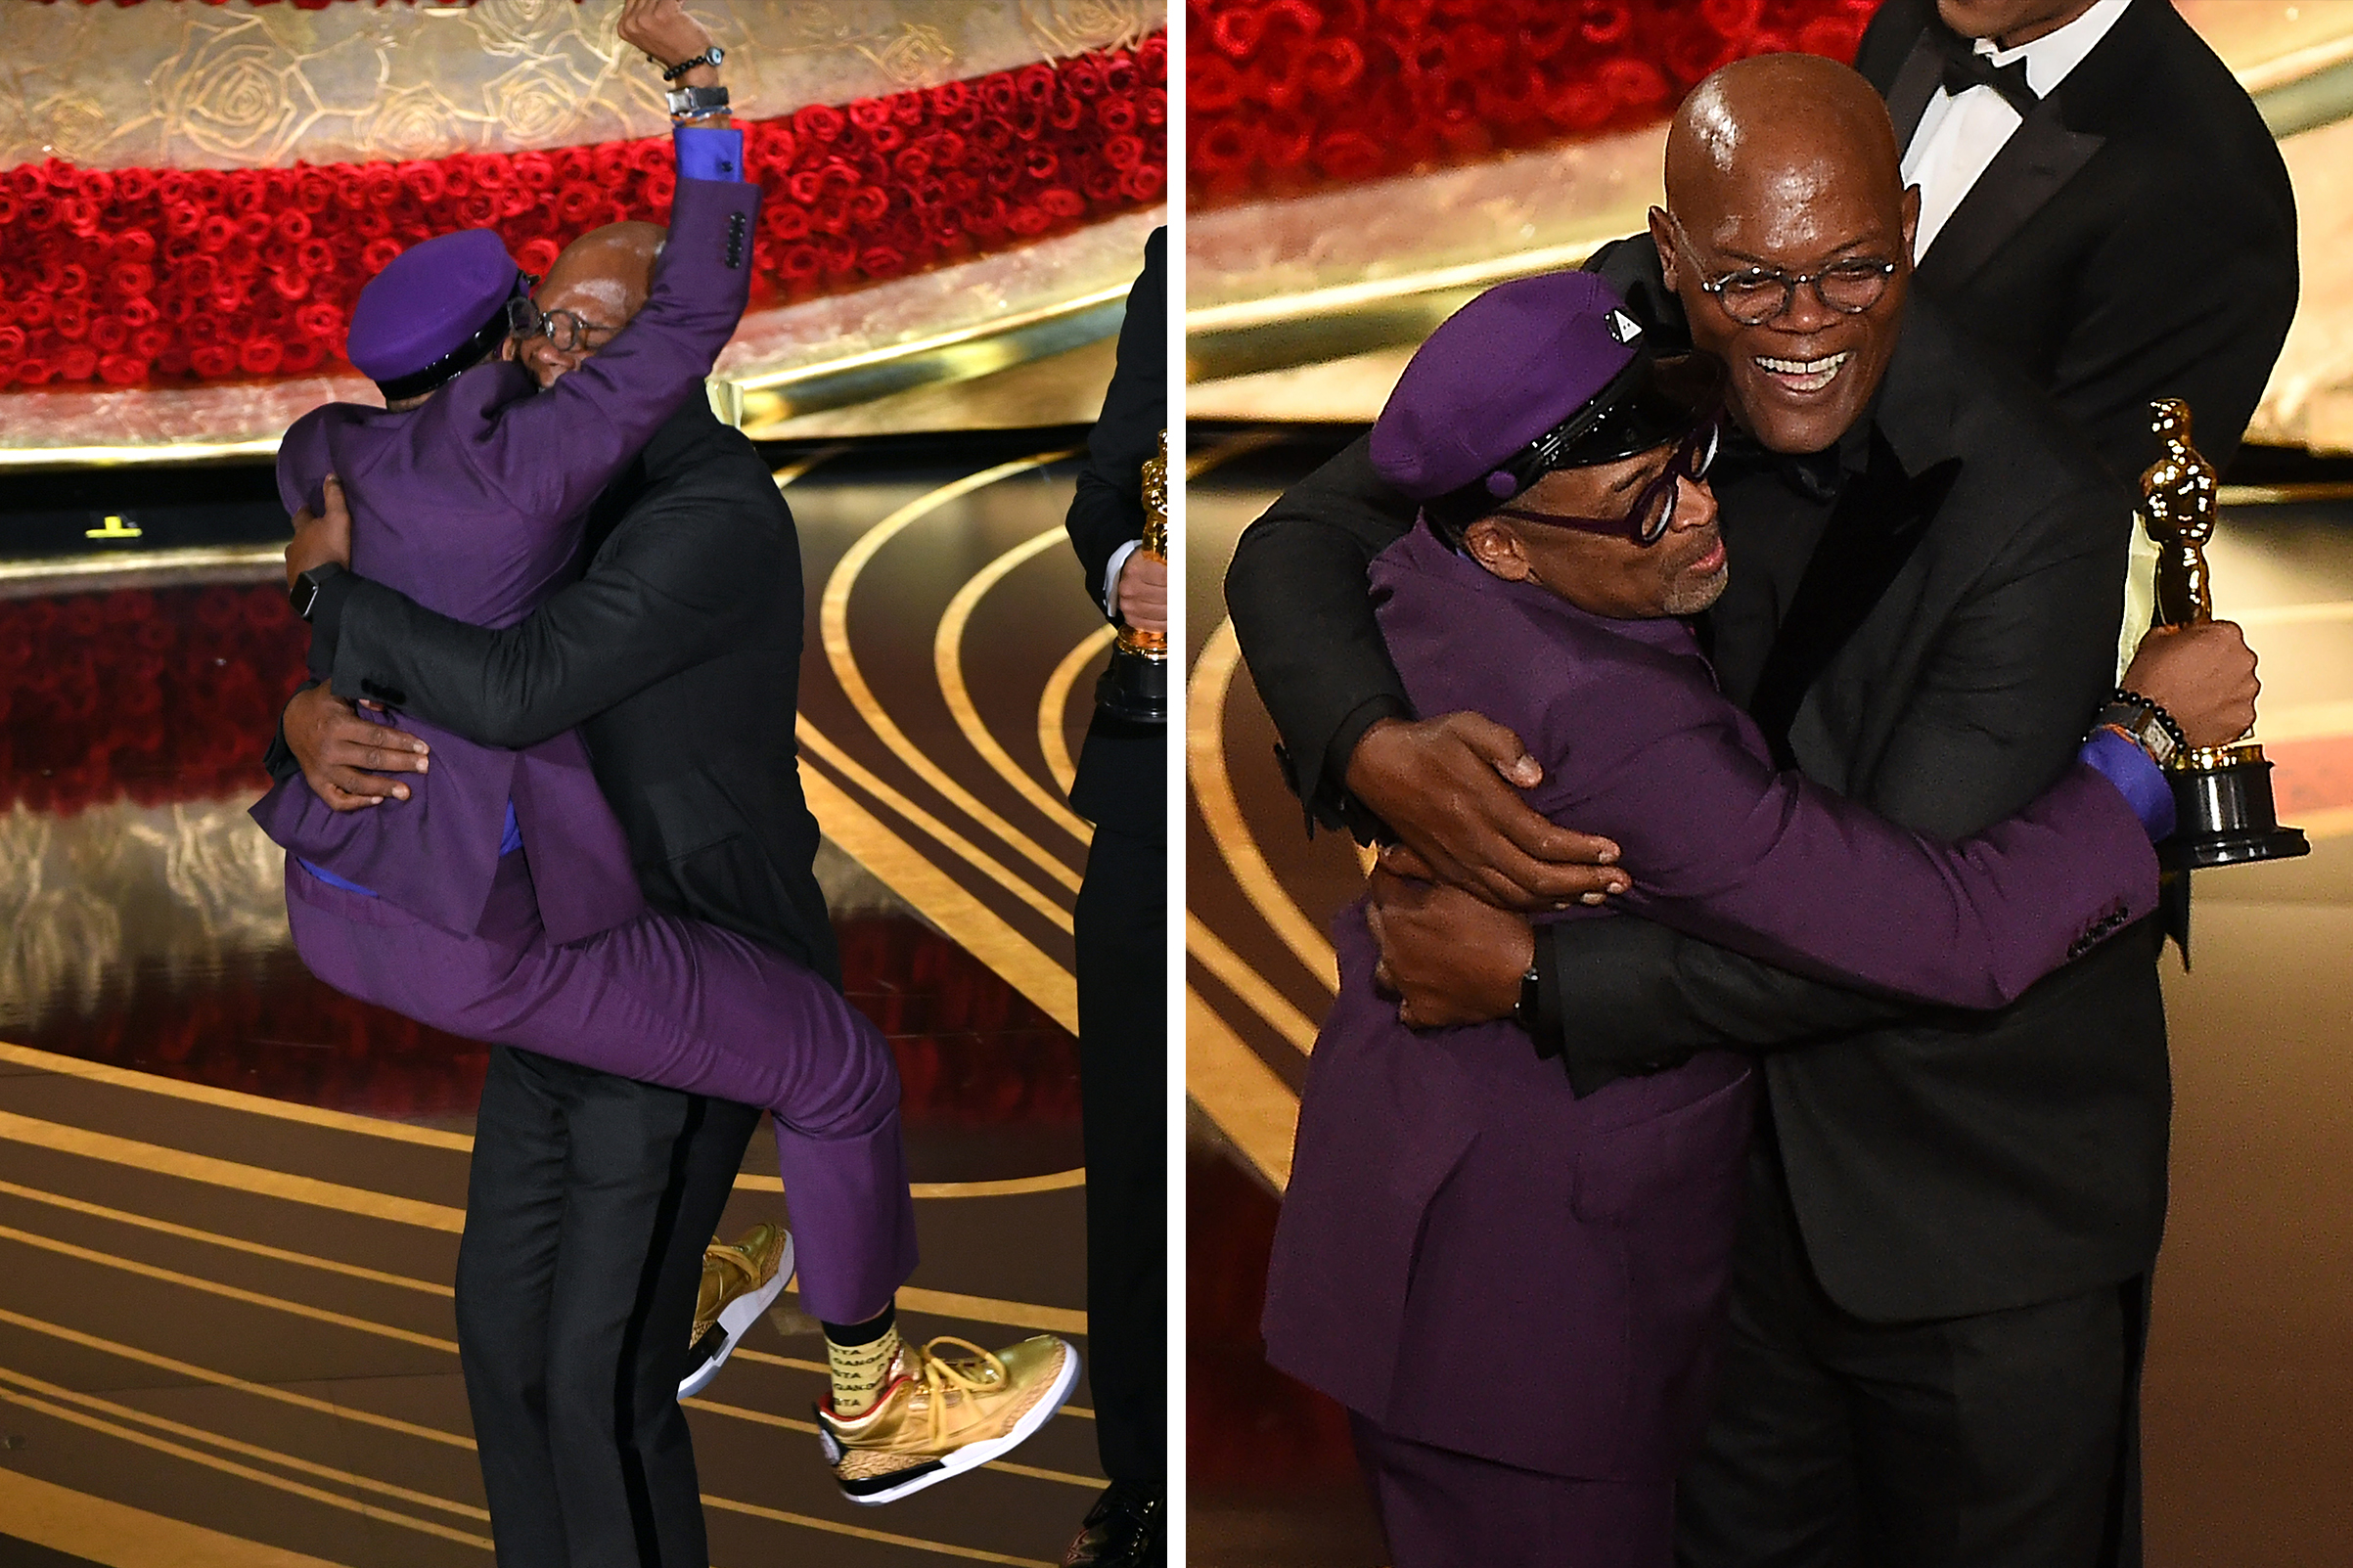 Spike Lee and Samuel L. Jackson at the Oscars Is Utter Joy | Time